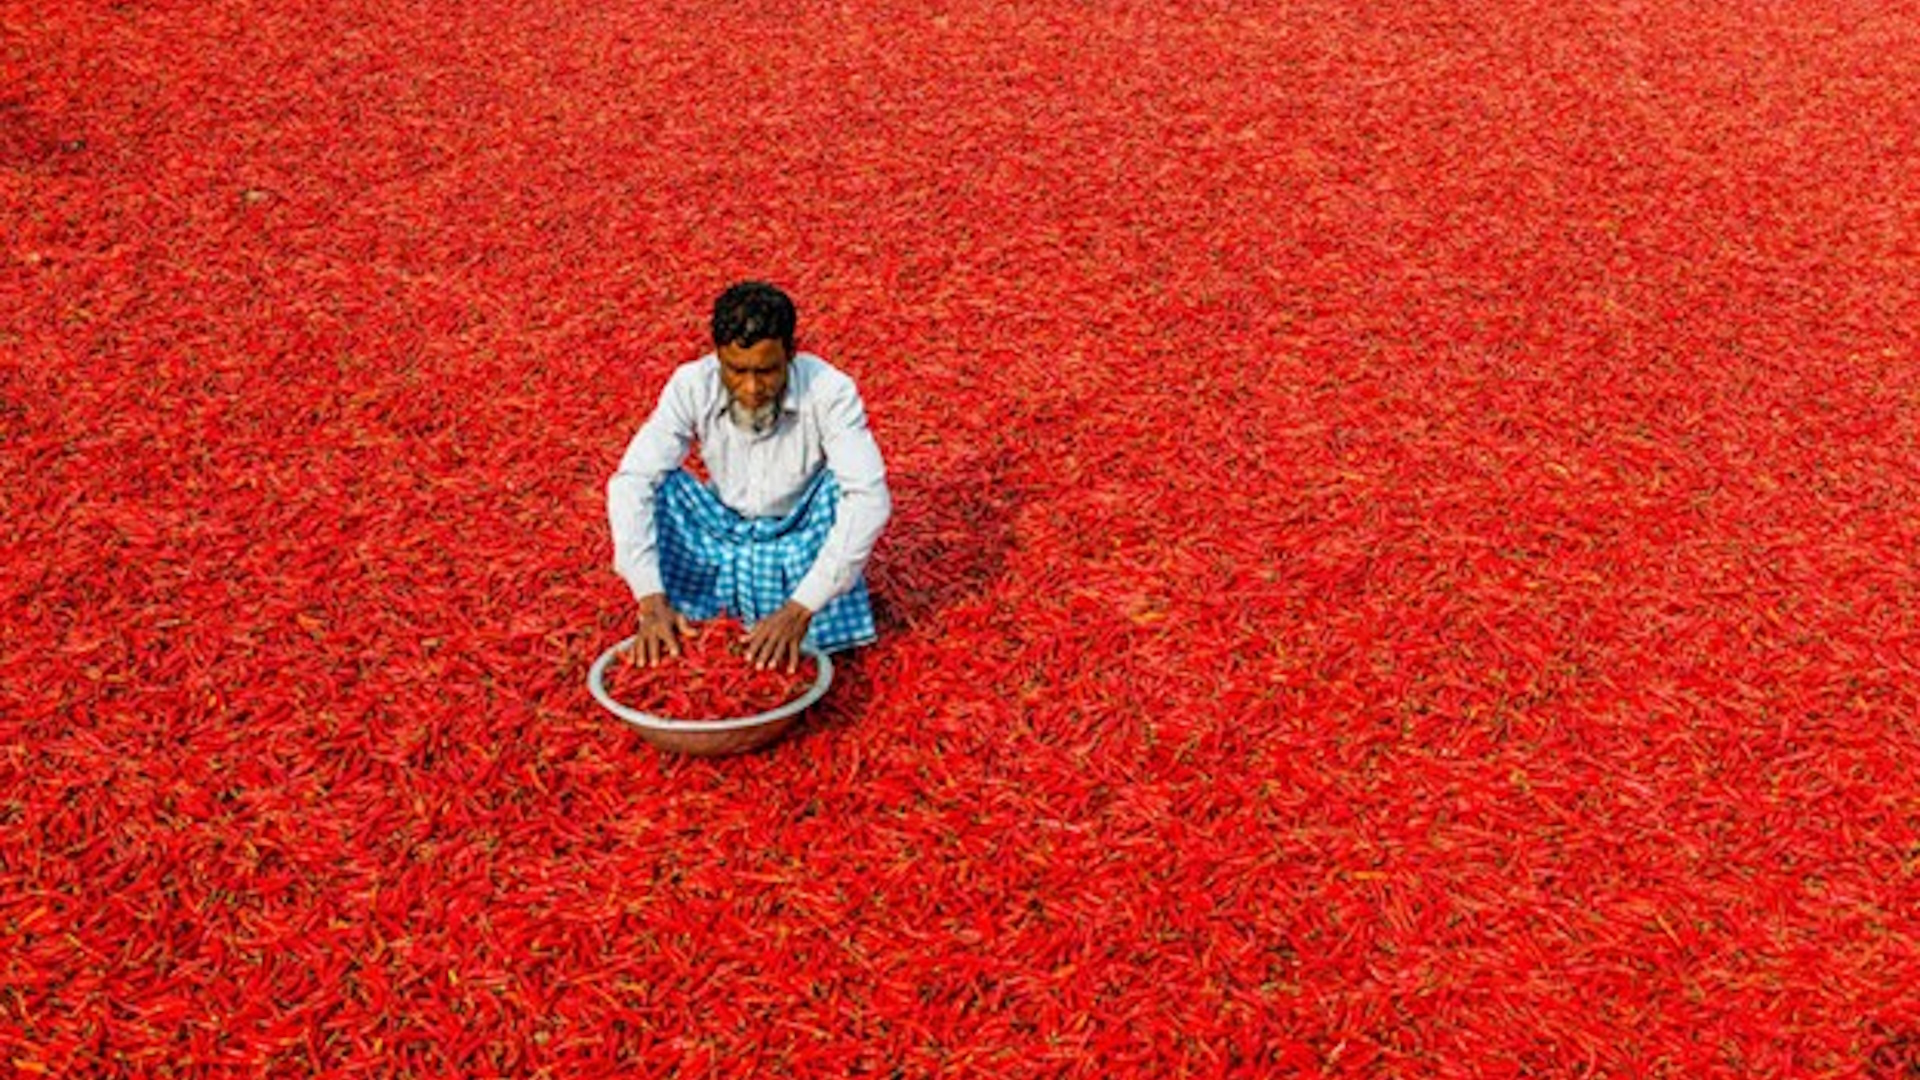 How to Become a Travel Photographer in 10 Simple Steps - Man in Red Field